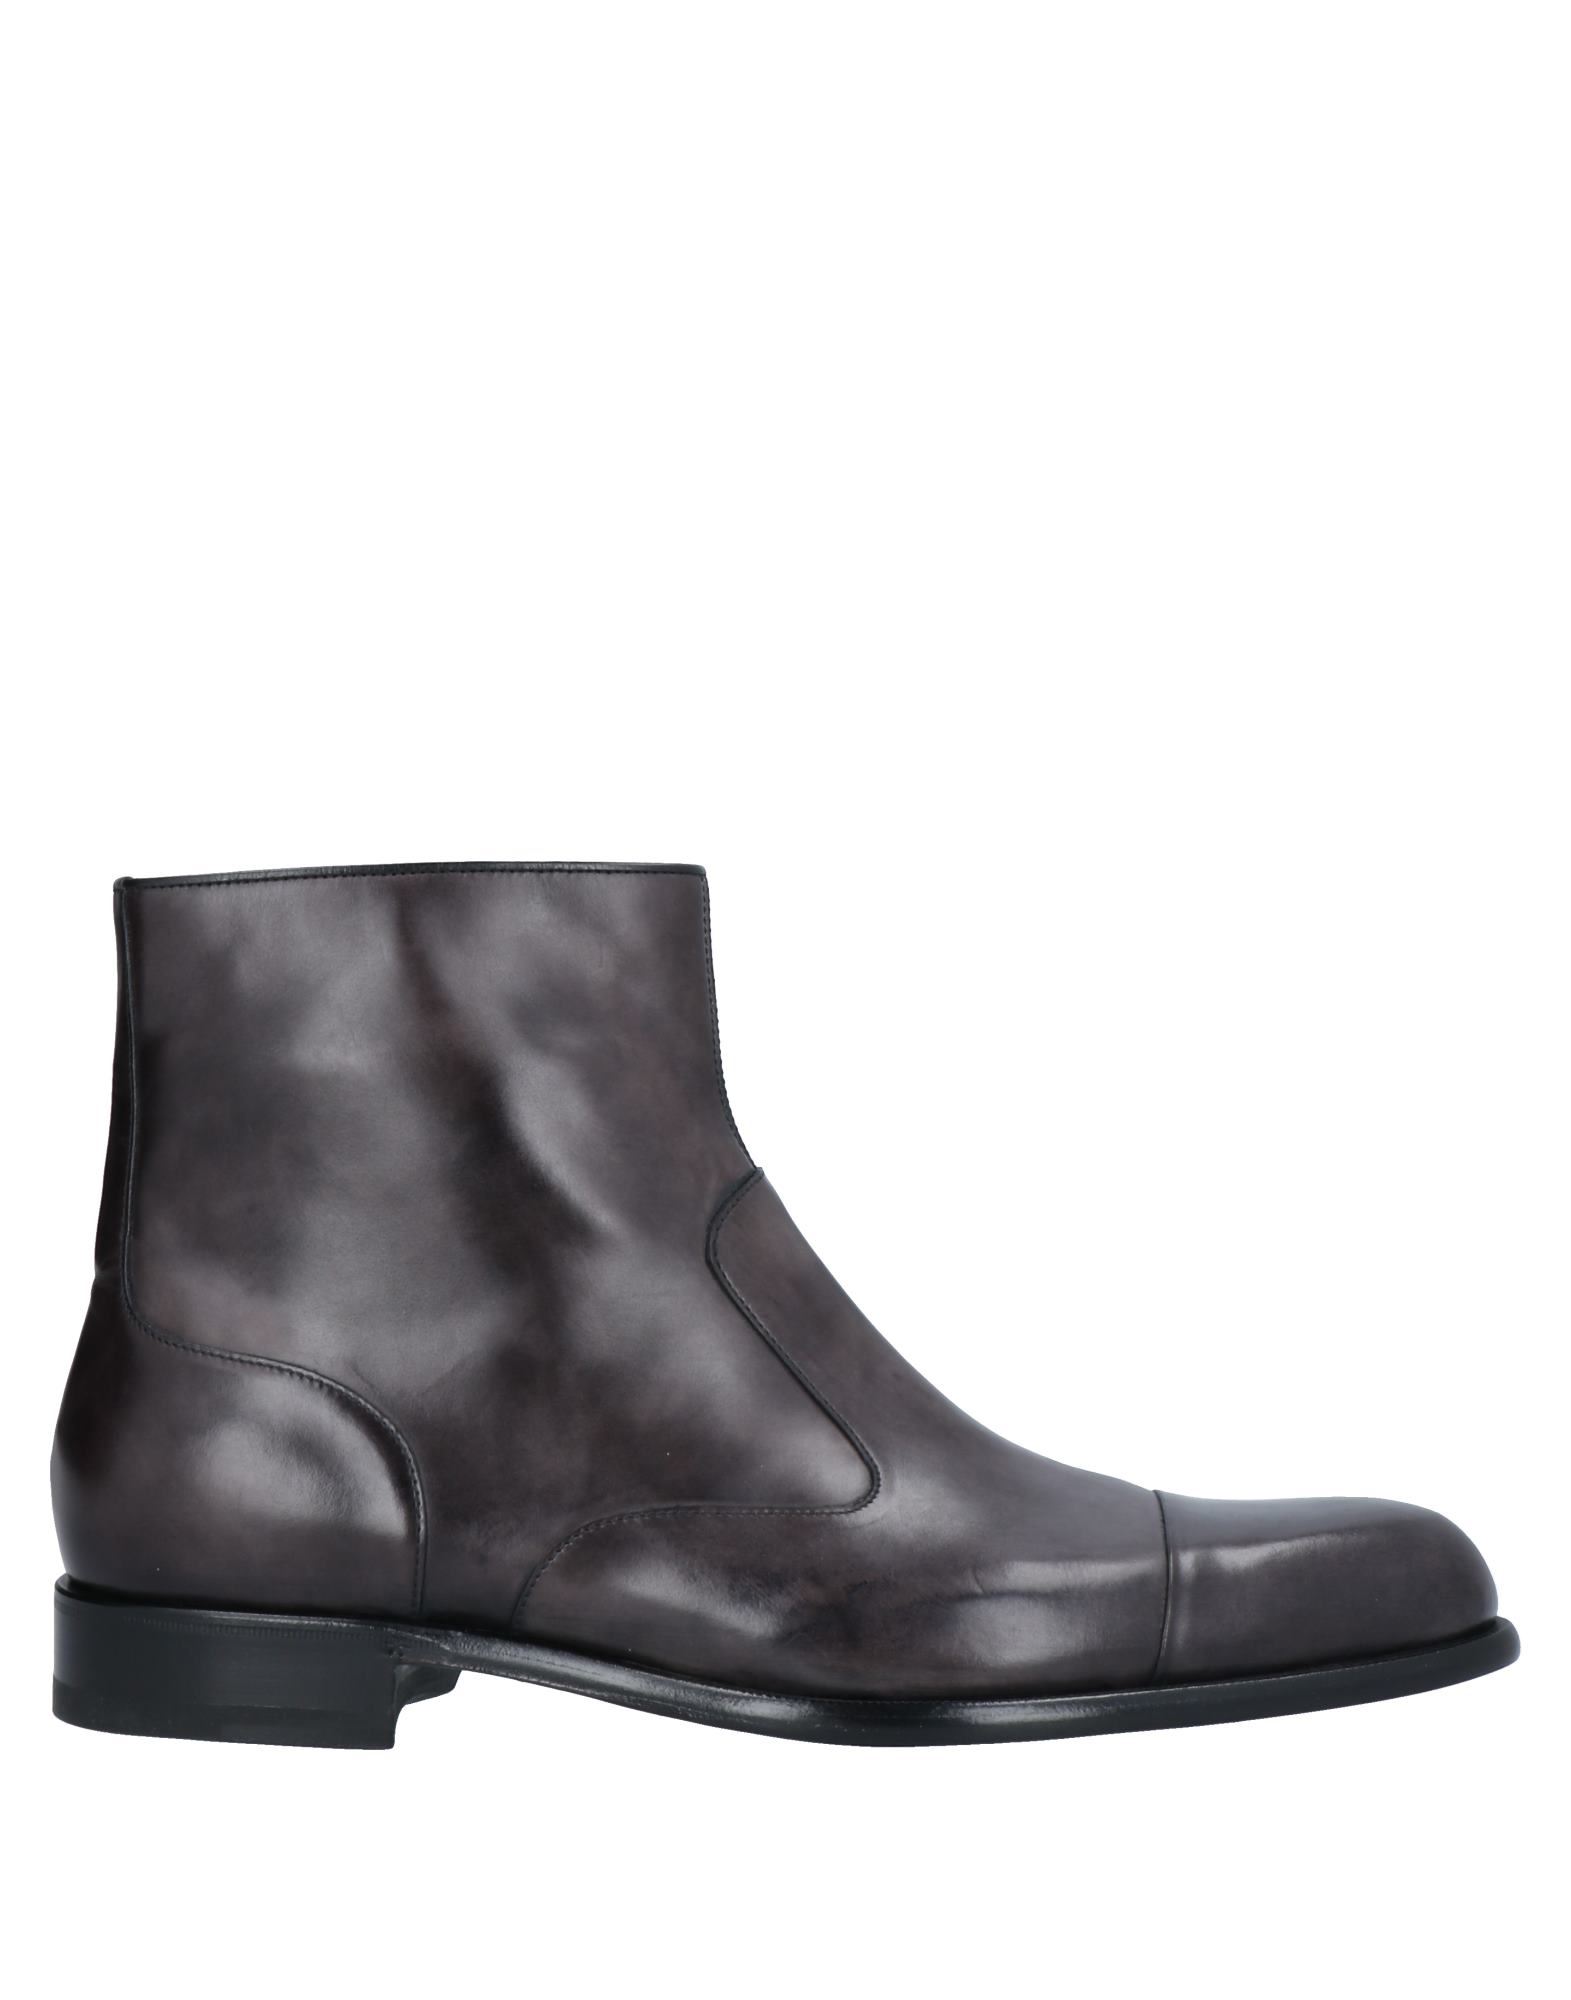 A.testoni Ankle Boots In Steel Grey